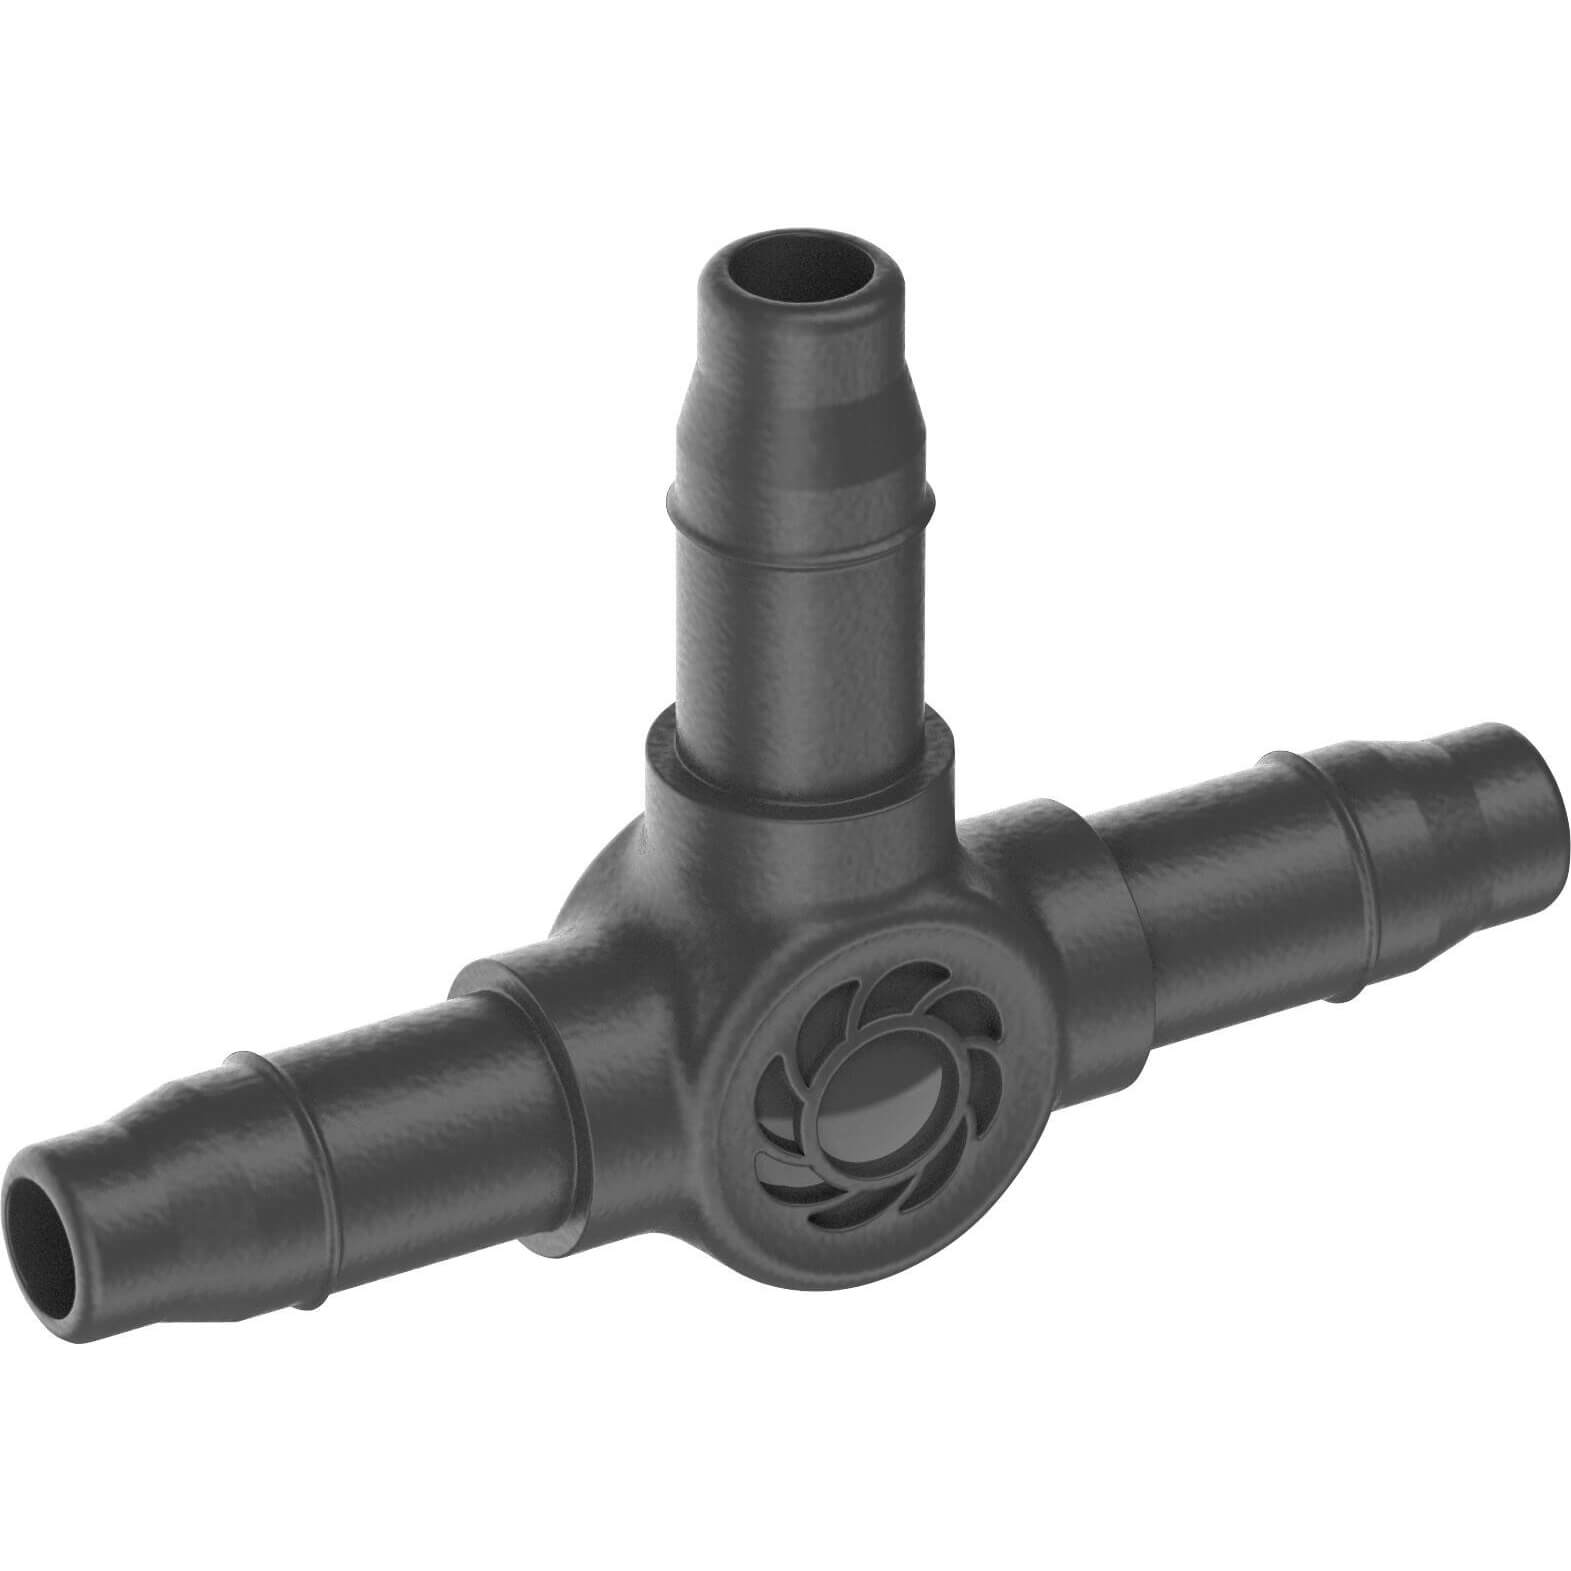 Image of Gardena MICRO DRIP T Joint Pipe Connector (New) 3/16" / 4.6mm Pack of 10